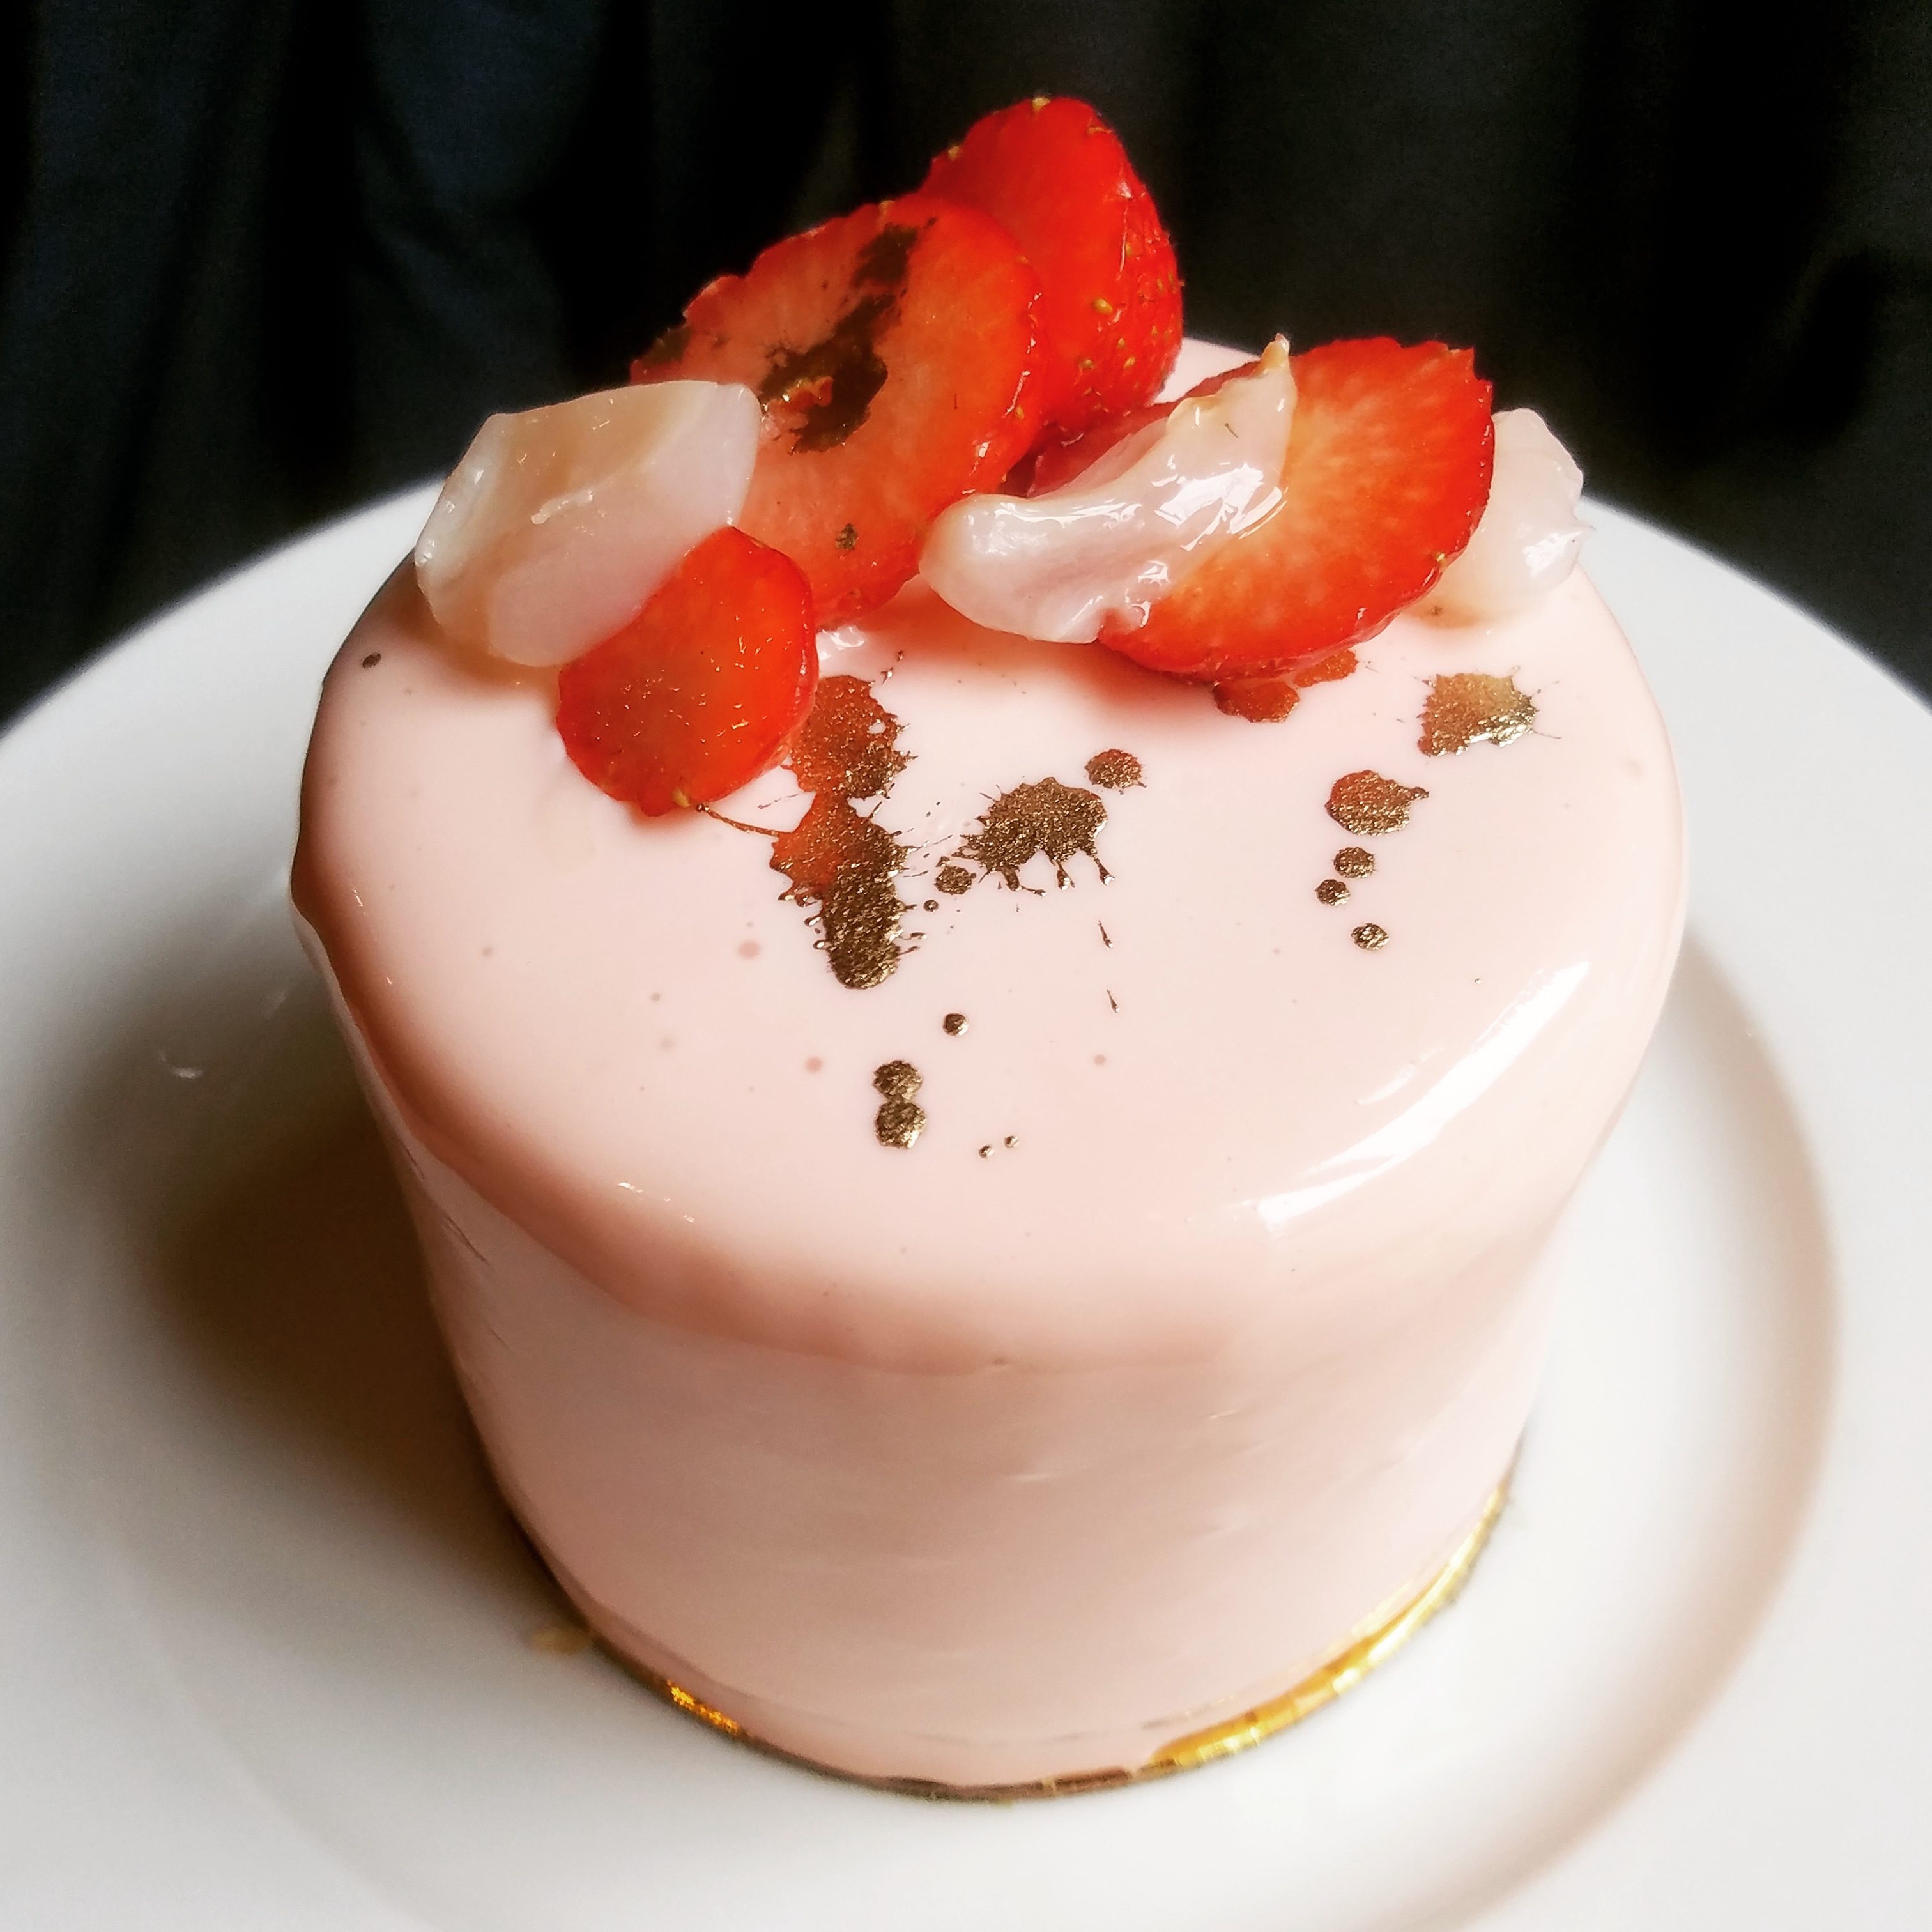 Strawberry rose lychee entremet, covered with pink glaze, on a white plate.